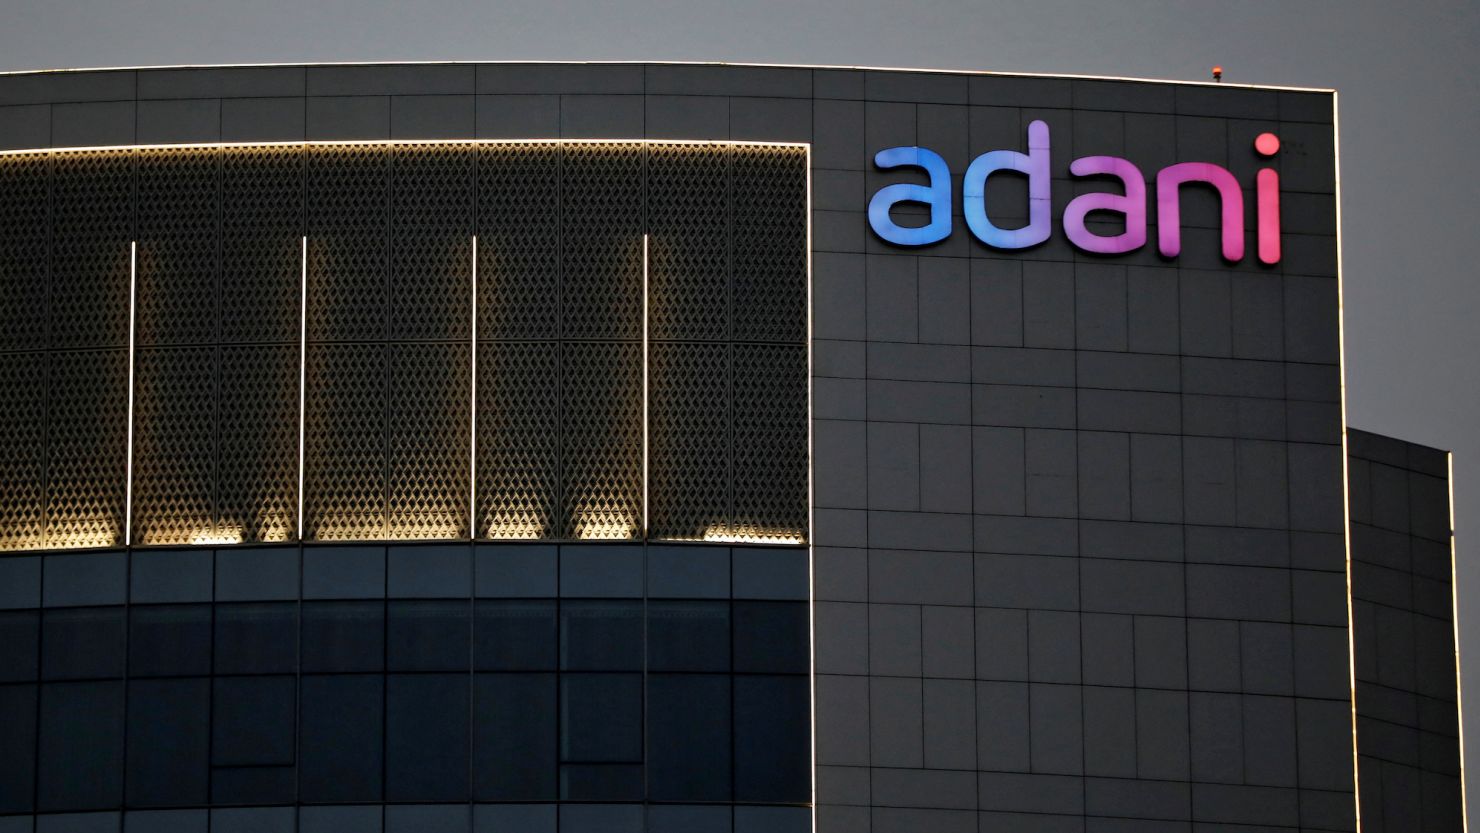 The logo of the Adani Group is seen on the facade of one of its buildings on the outskirts of Ahmedabad, India, April 13, 2021.